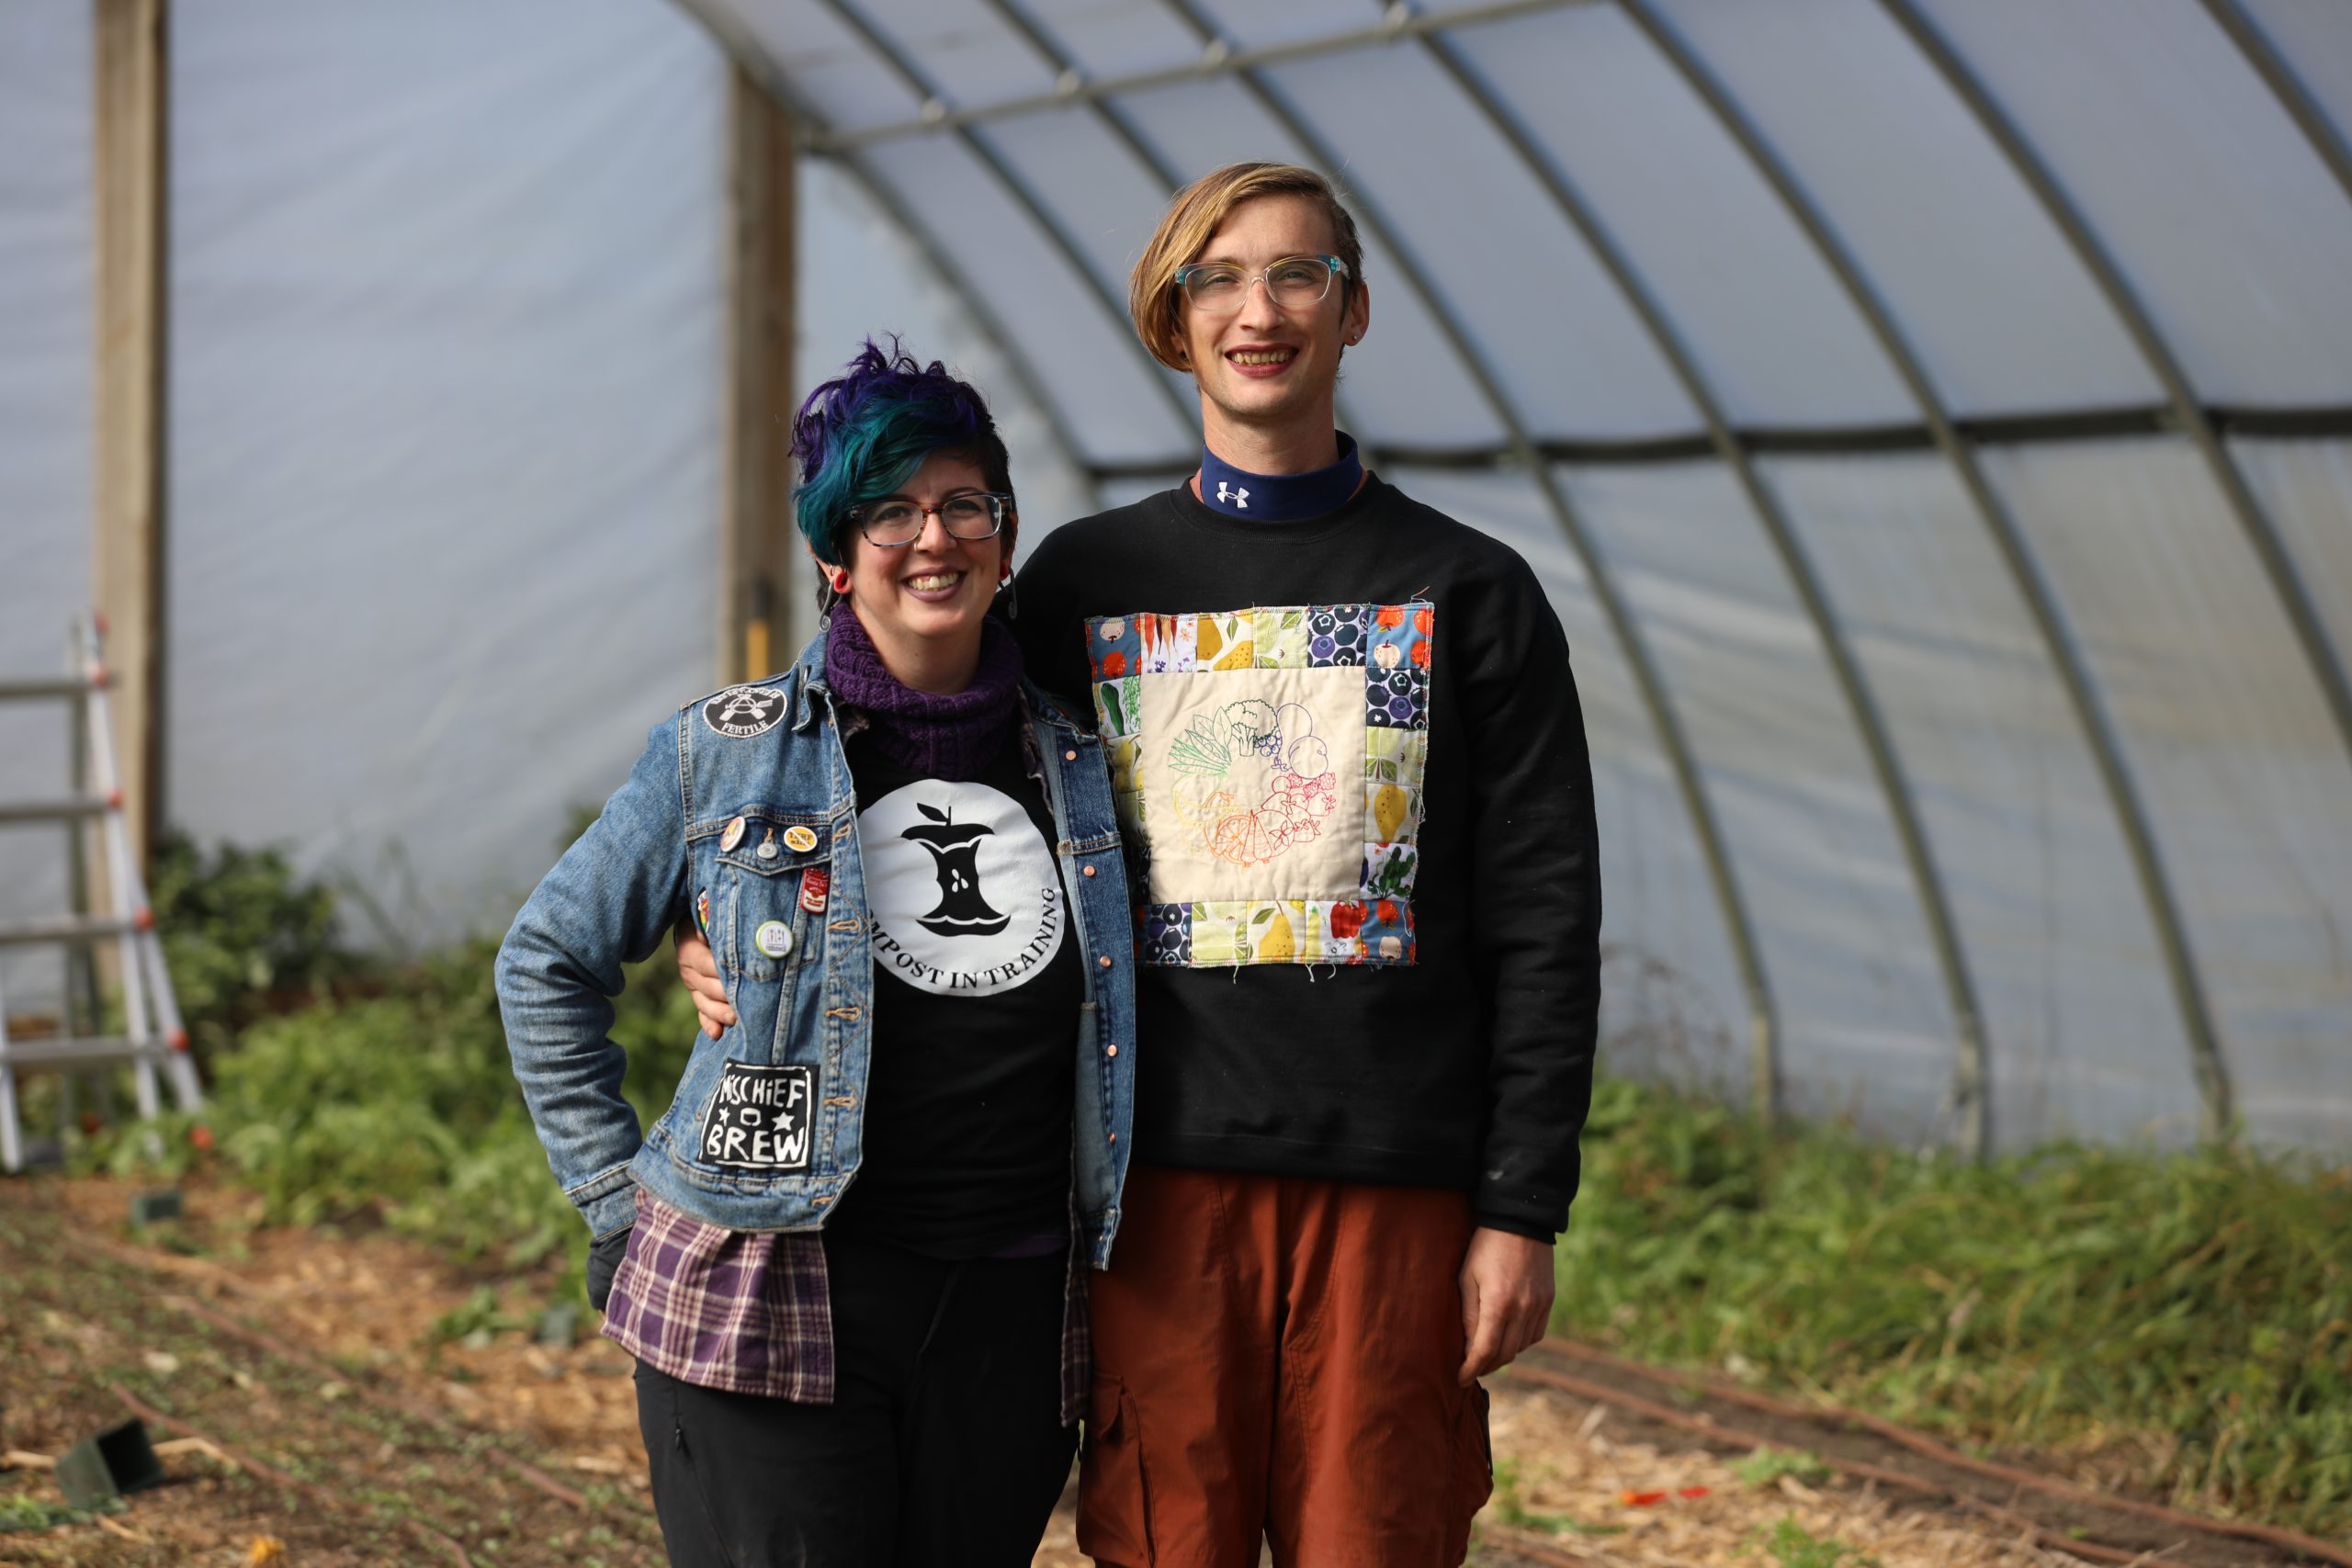 Queering the family farm Despite obstacles, LGBTQ farmers find fertile ground in Midwest image image